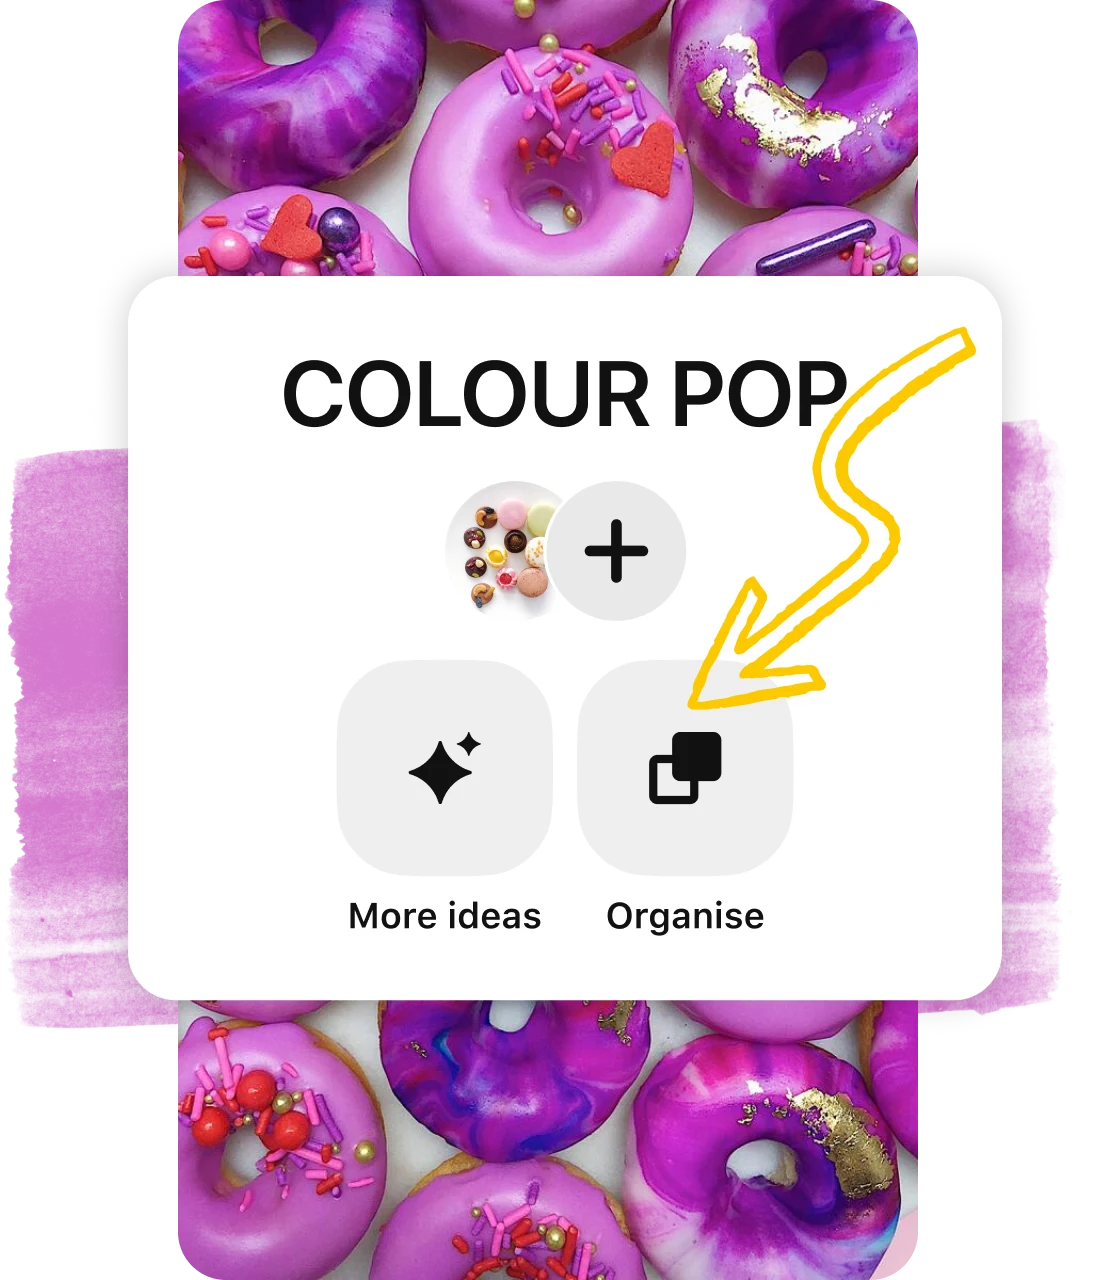 Snapshot of a Pin board header overlaid on a Pin of purple doughnuts